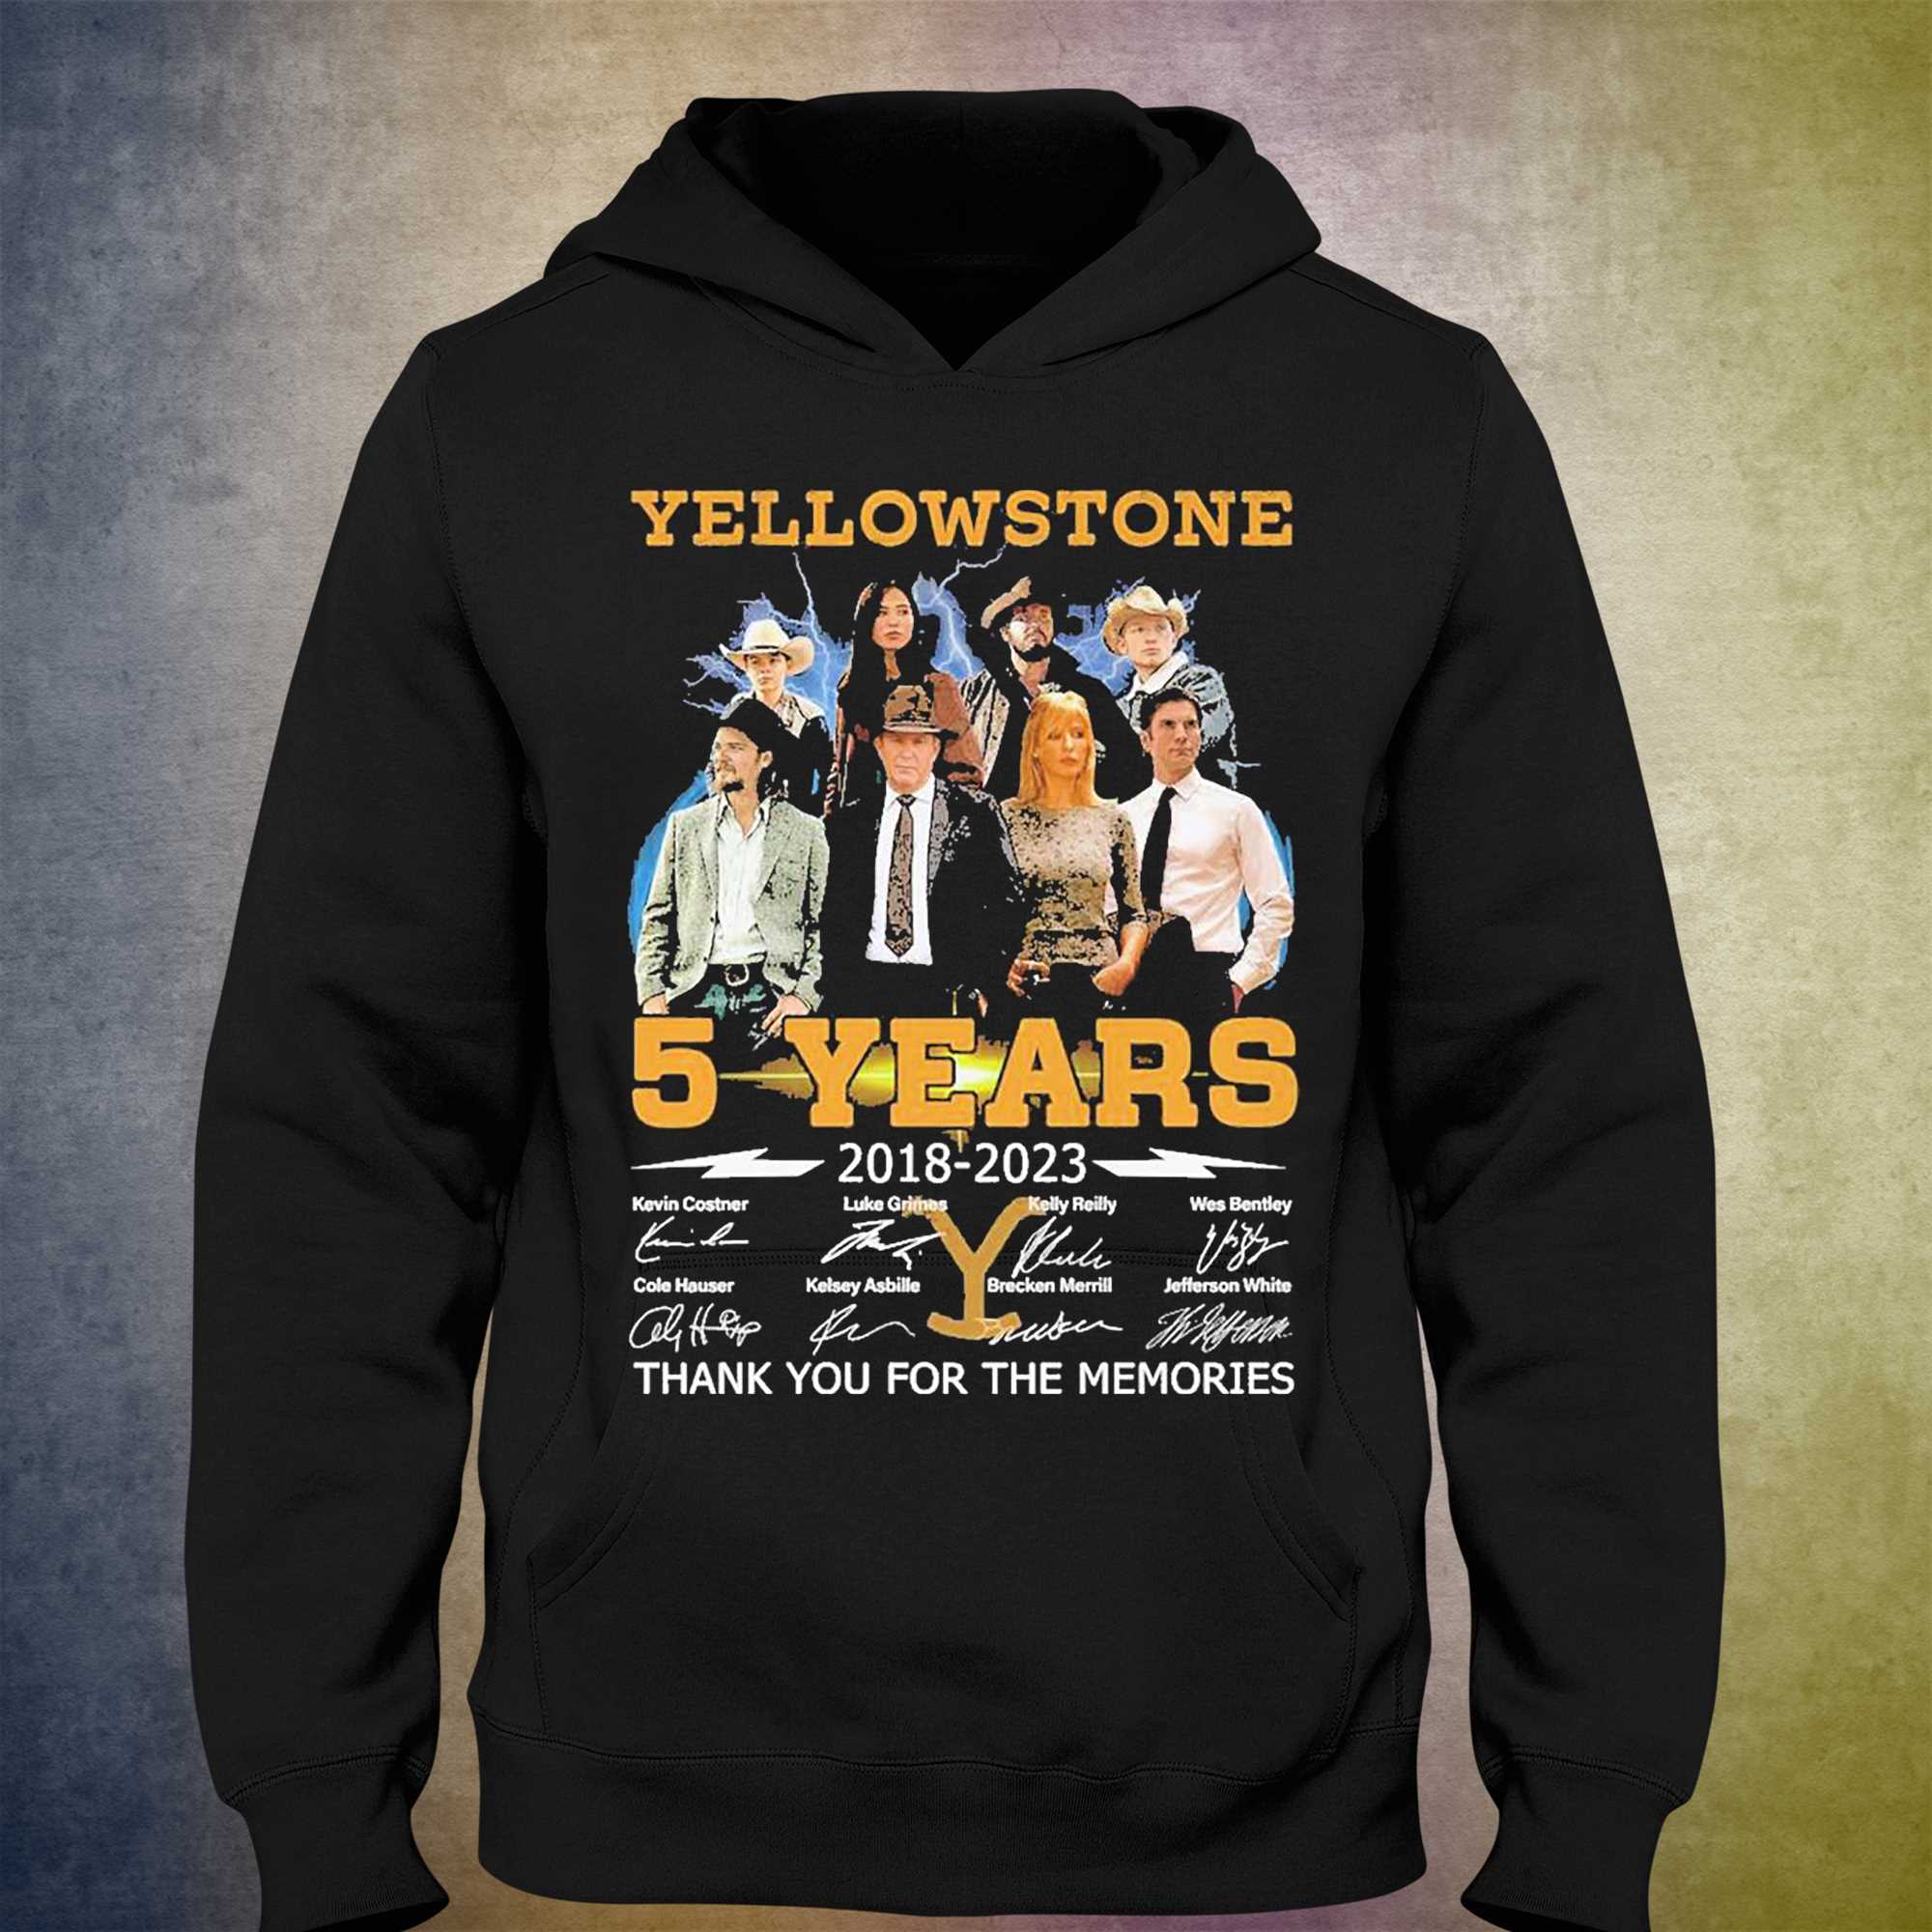 05 Years Anniversary Of Yellowstone 2018-2023 Thank You For The Memories Signatures Shirt 3